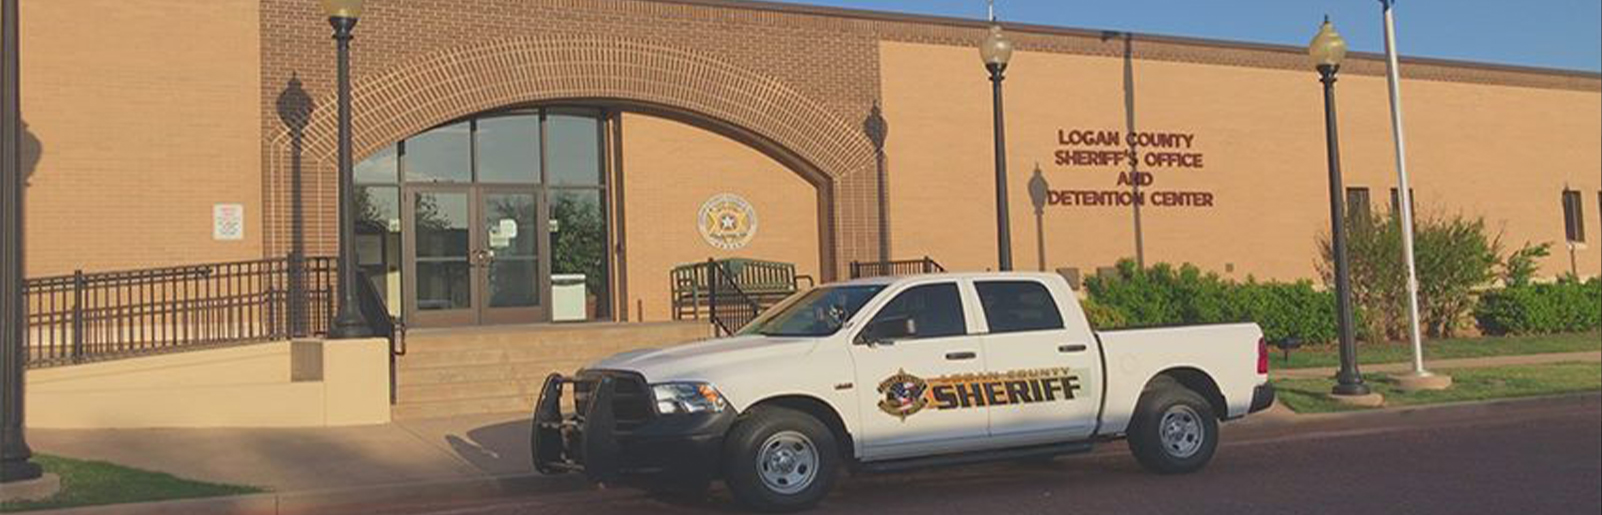 Image of Logan County Sheriff's Office